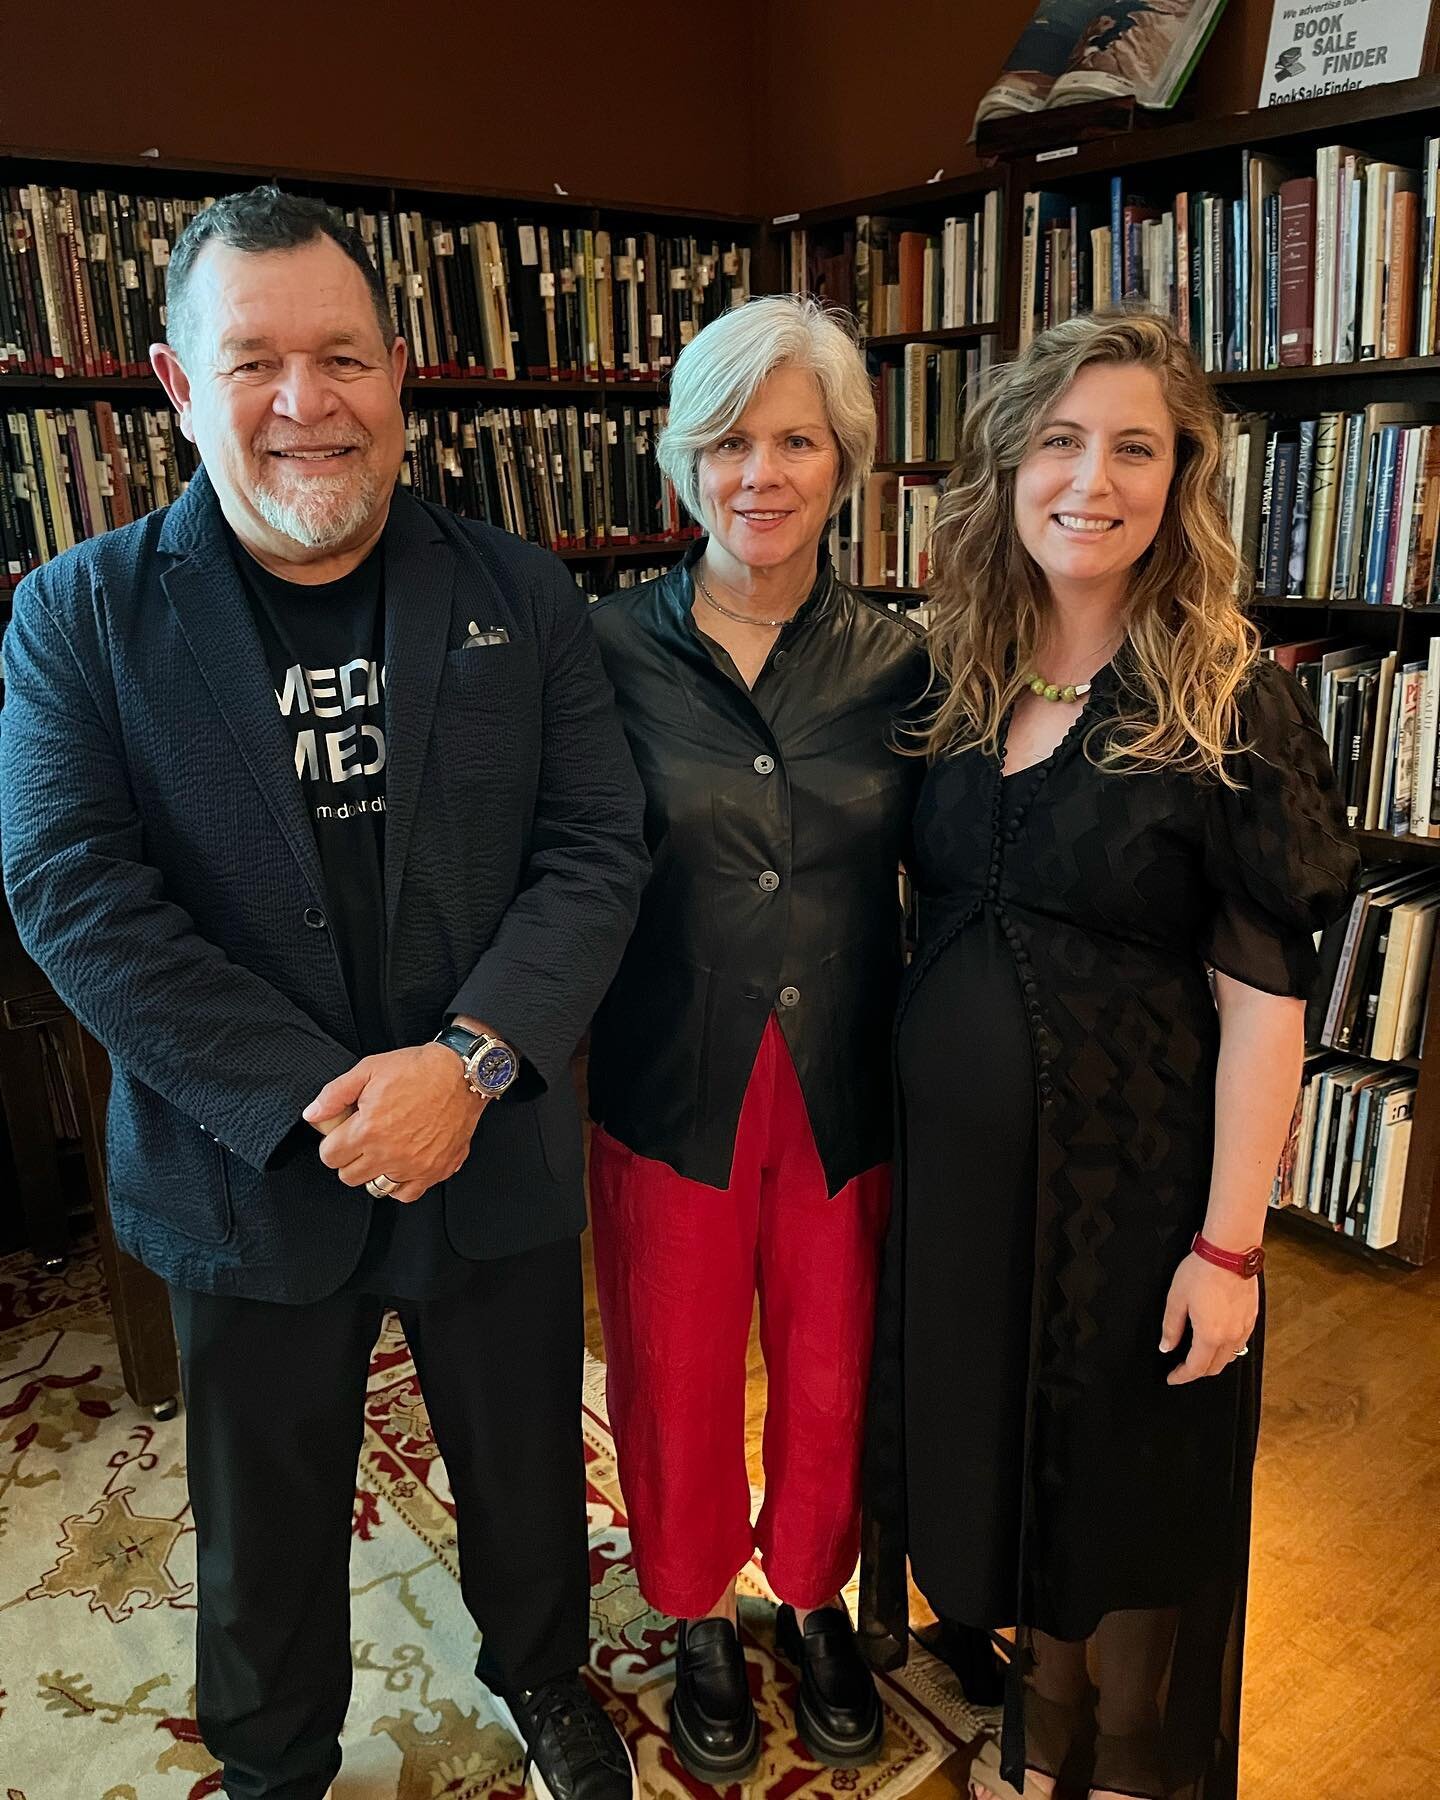 We were honored to have Marcos Ramirez ERRE speak at the Athenaeum last week! The renowned artist shared his insights and experiences, discussing his creative process and the inspiration behind his thought-provoking works of art. He covered many of h